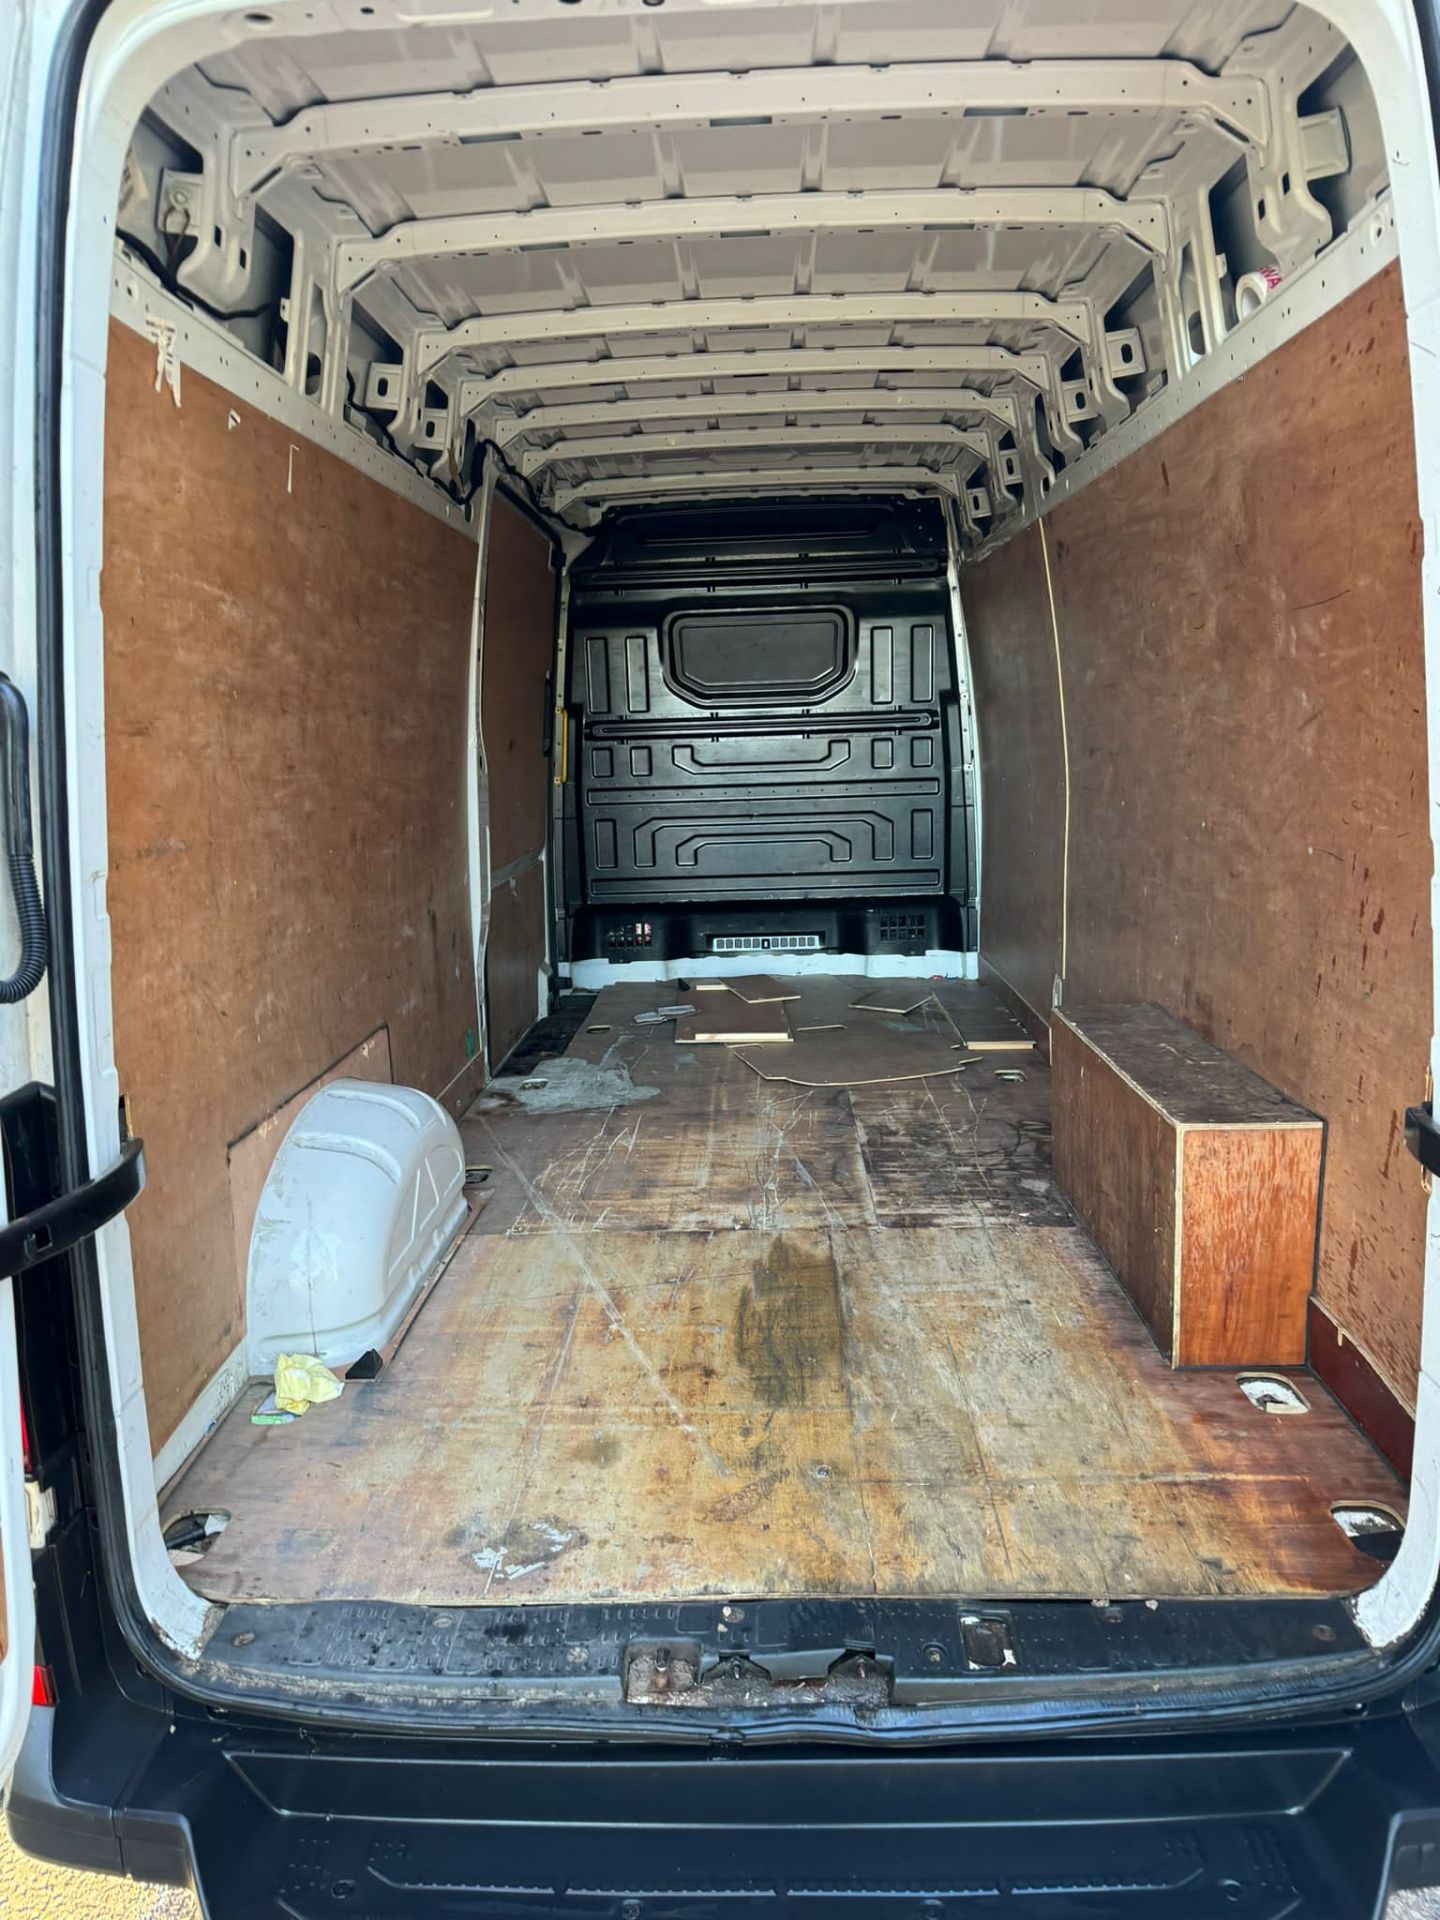 2019 69 VOLKSWAGEN CRAFTER LWB HIGH ROOF PANEL VAN - 87K MILES - PLY LINED. - Image 10 of 11